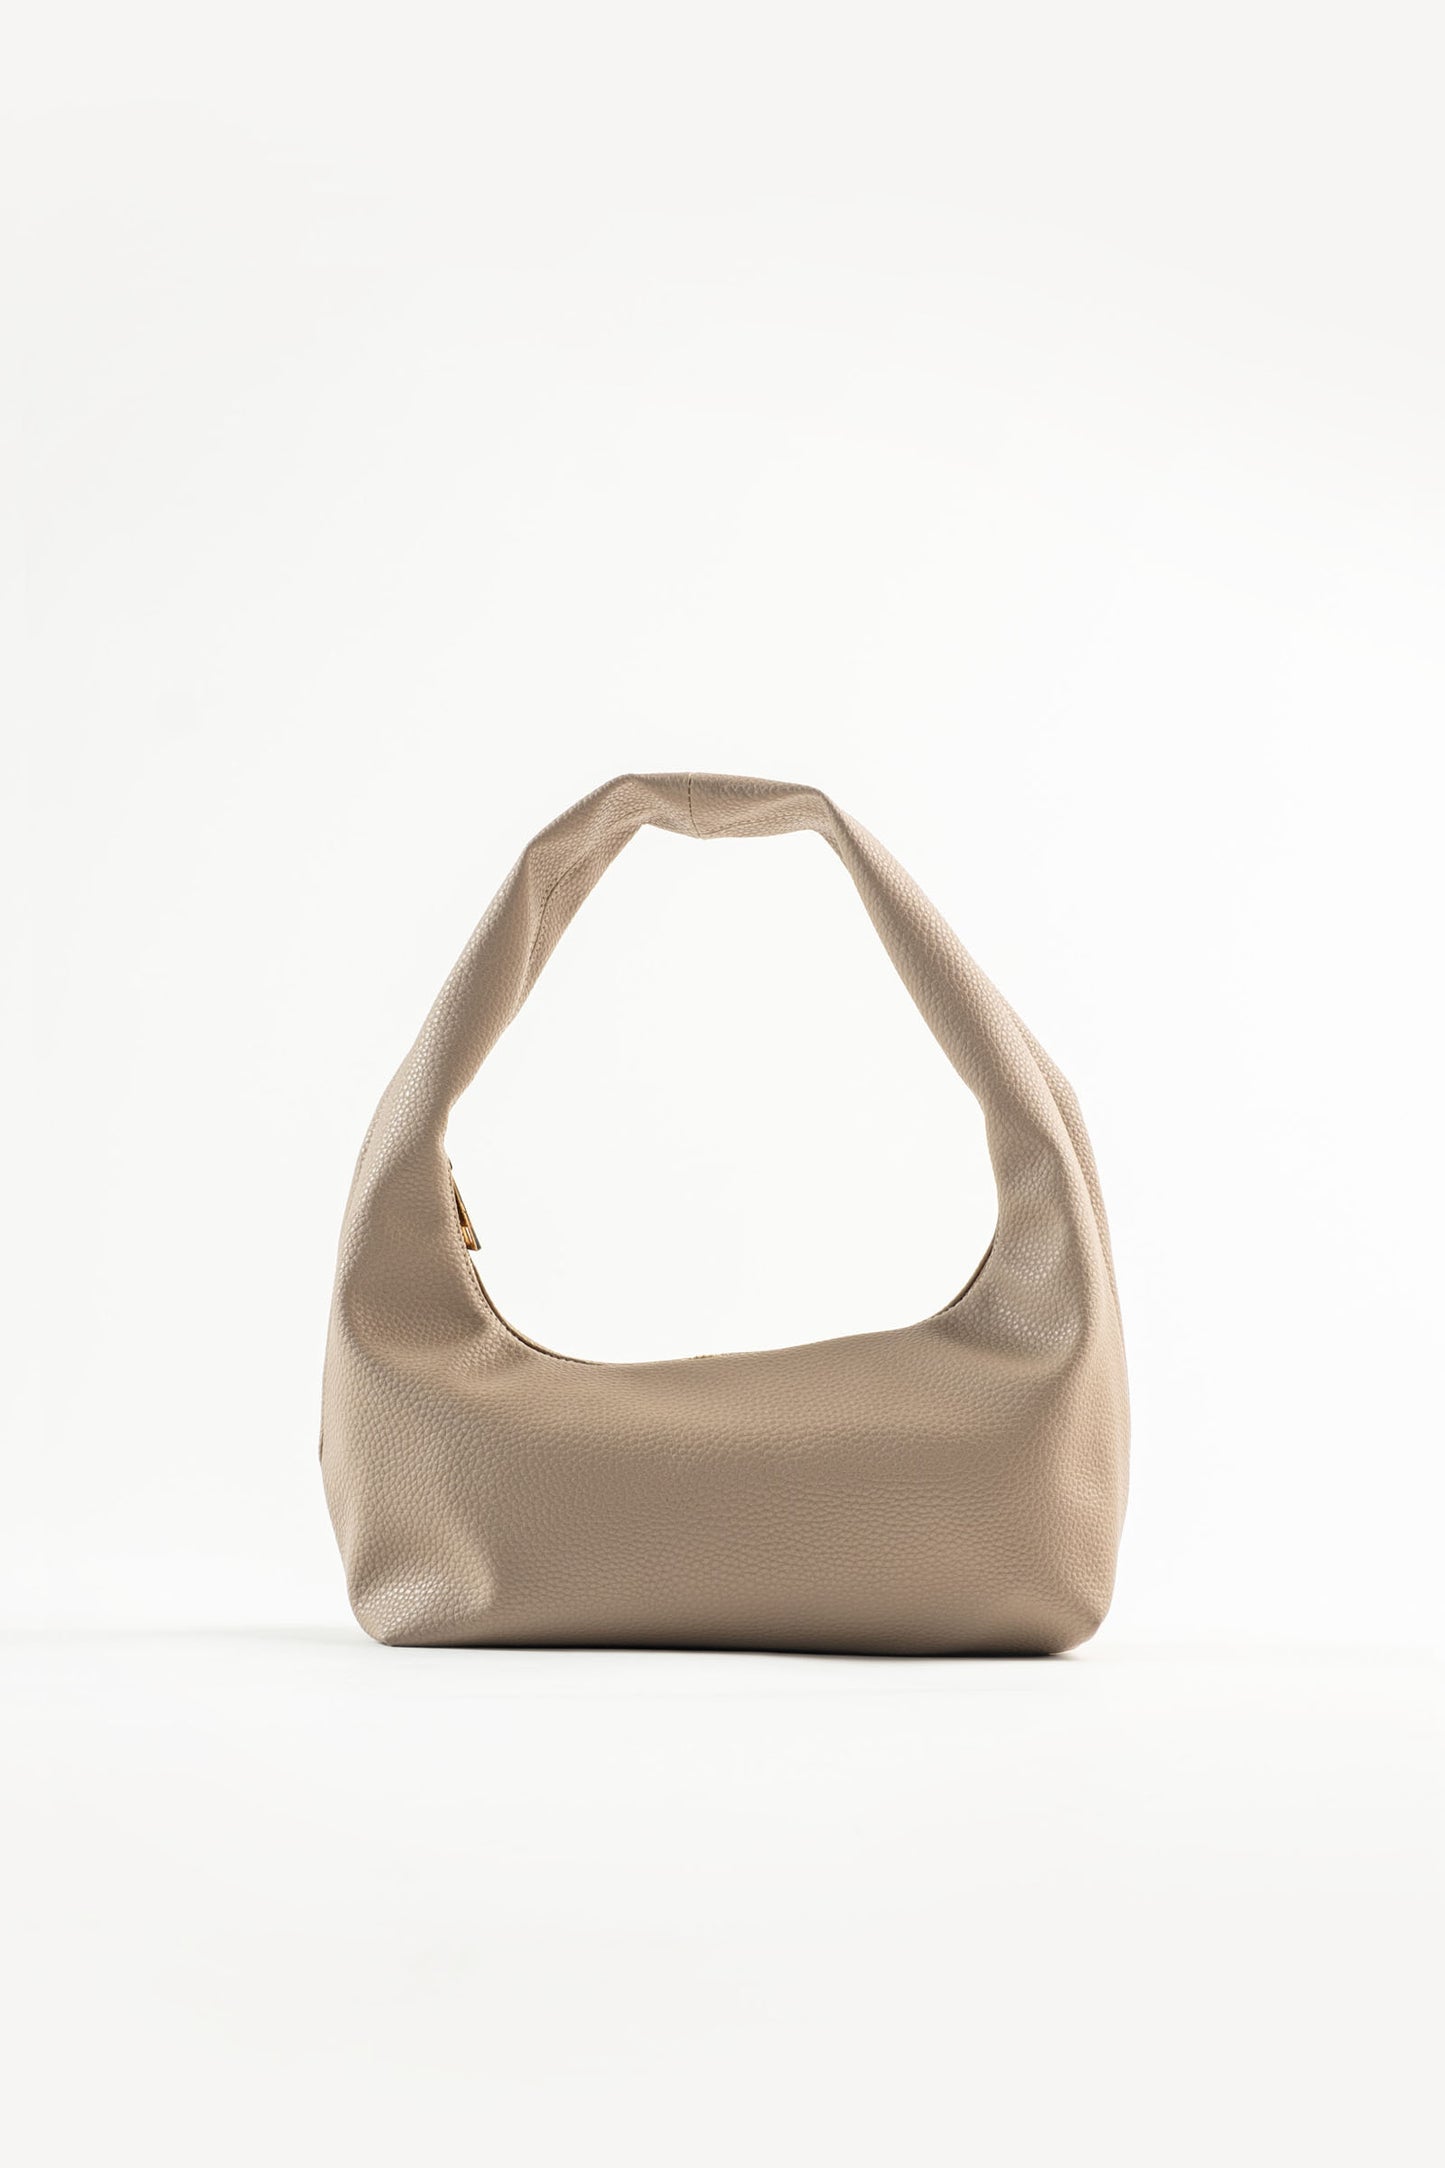 Small Hobo Bag in Taupe (Pre-Order)